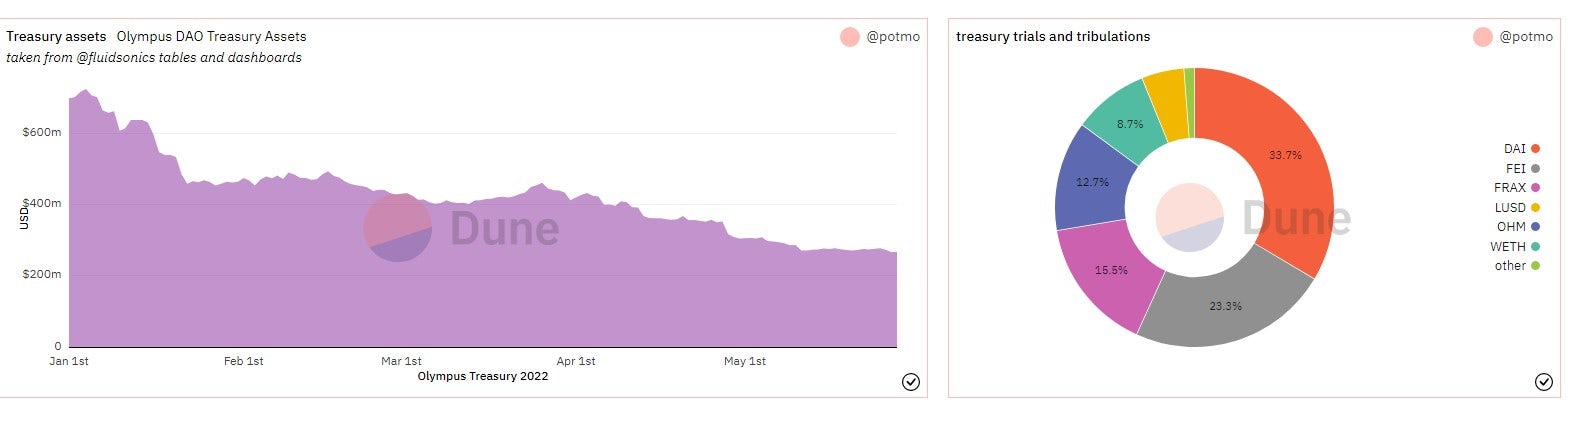 Olympus Treasury. Left: Composite treasury assets for 2022. Right: the distribution of tokens in the treasury are comprised mainly of stable coins with WETH the exception. The OHM of course is not used to compute backing. The "other" sliver is a hodge podge of small experimental investments.